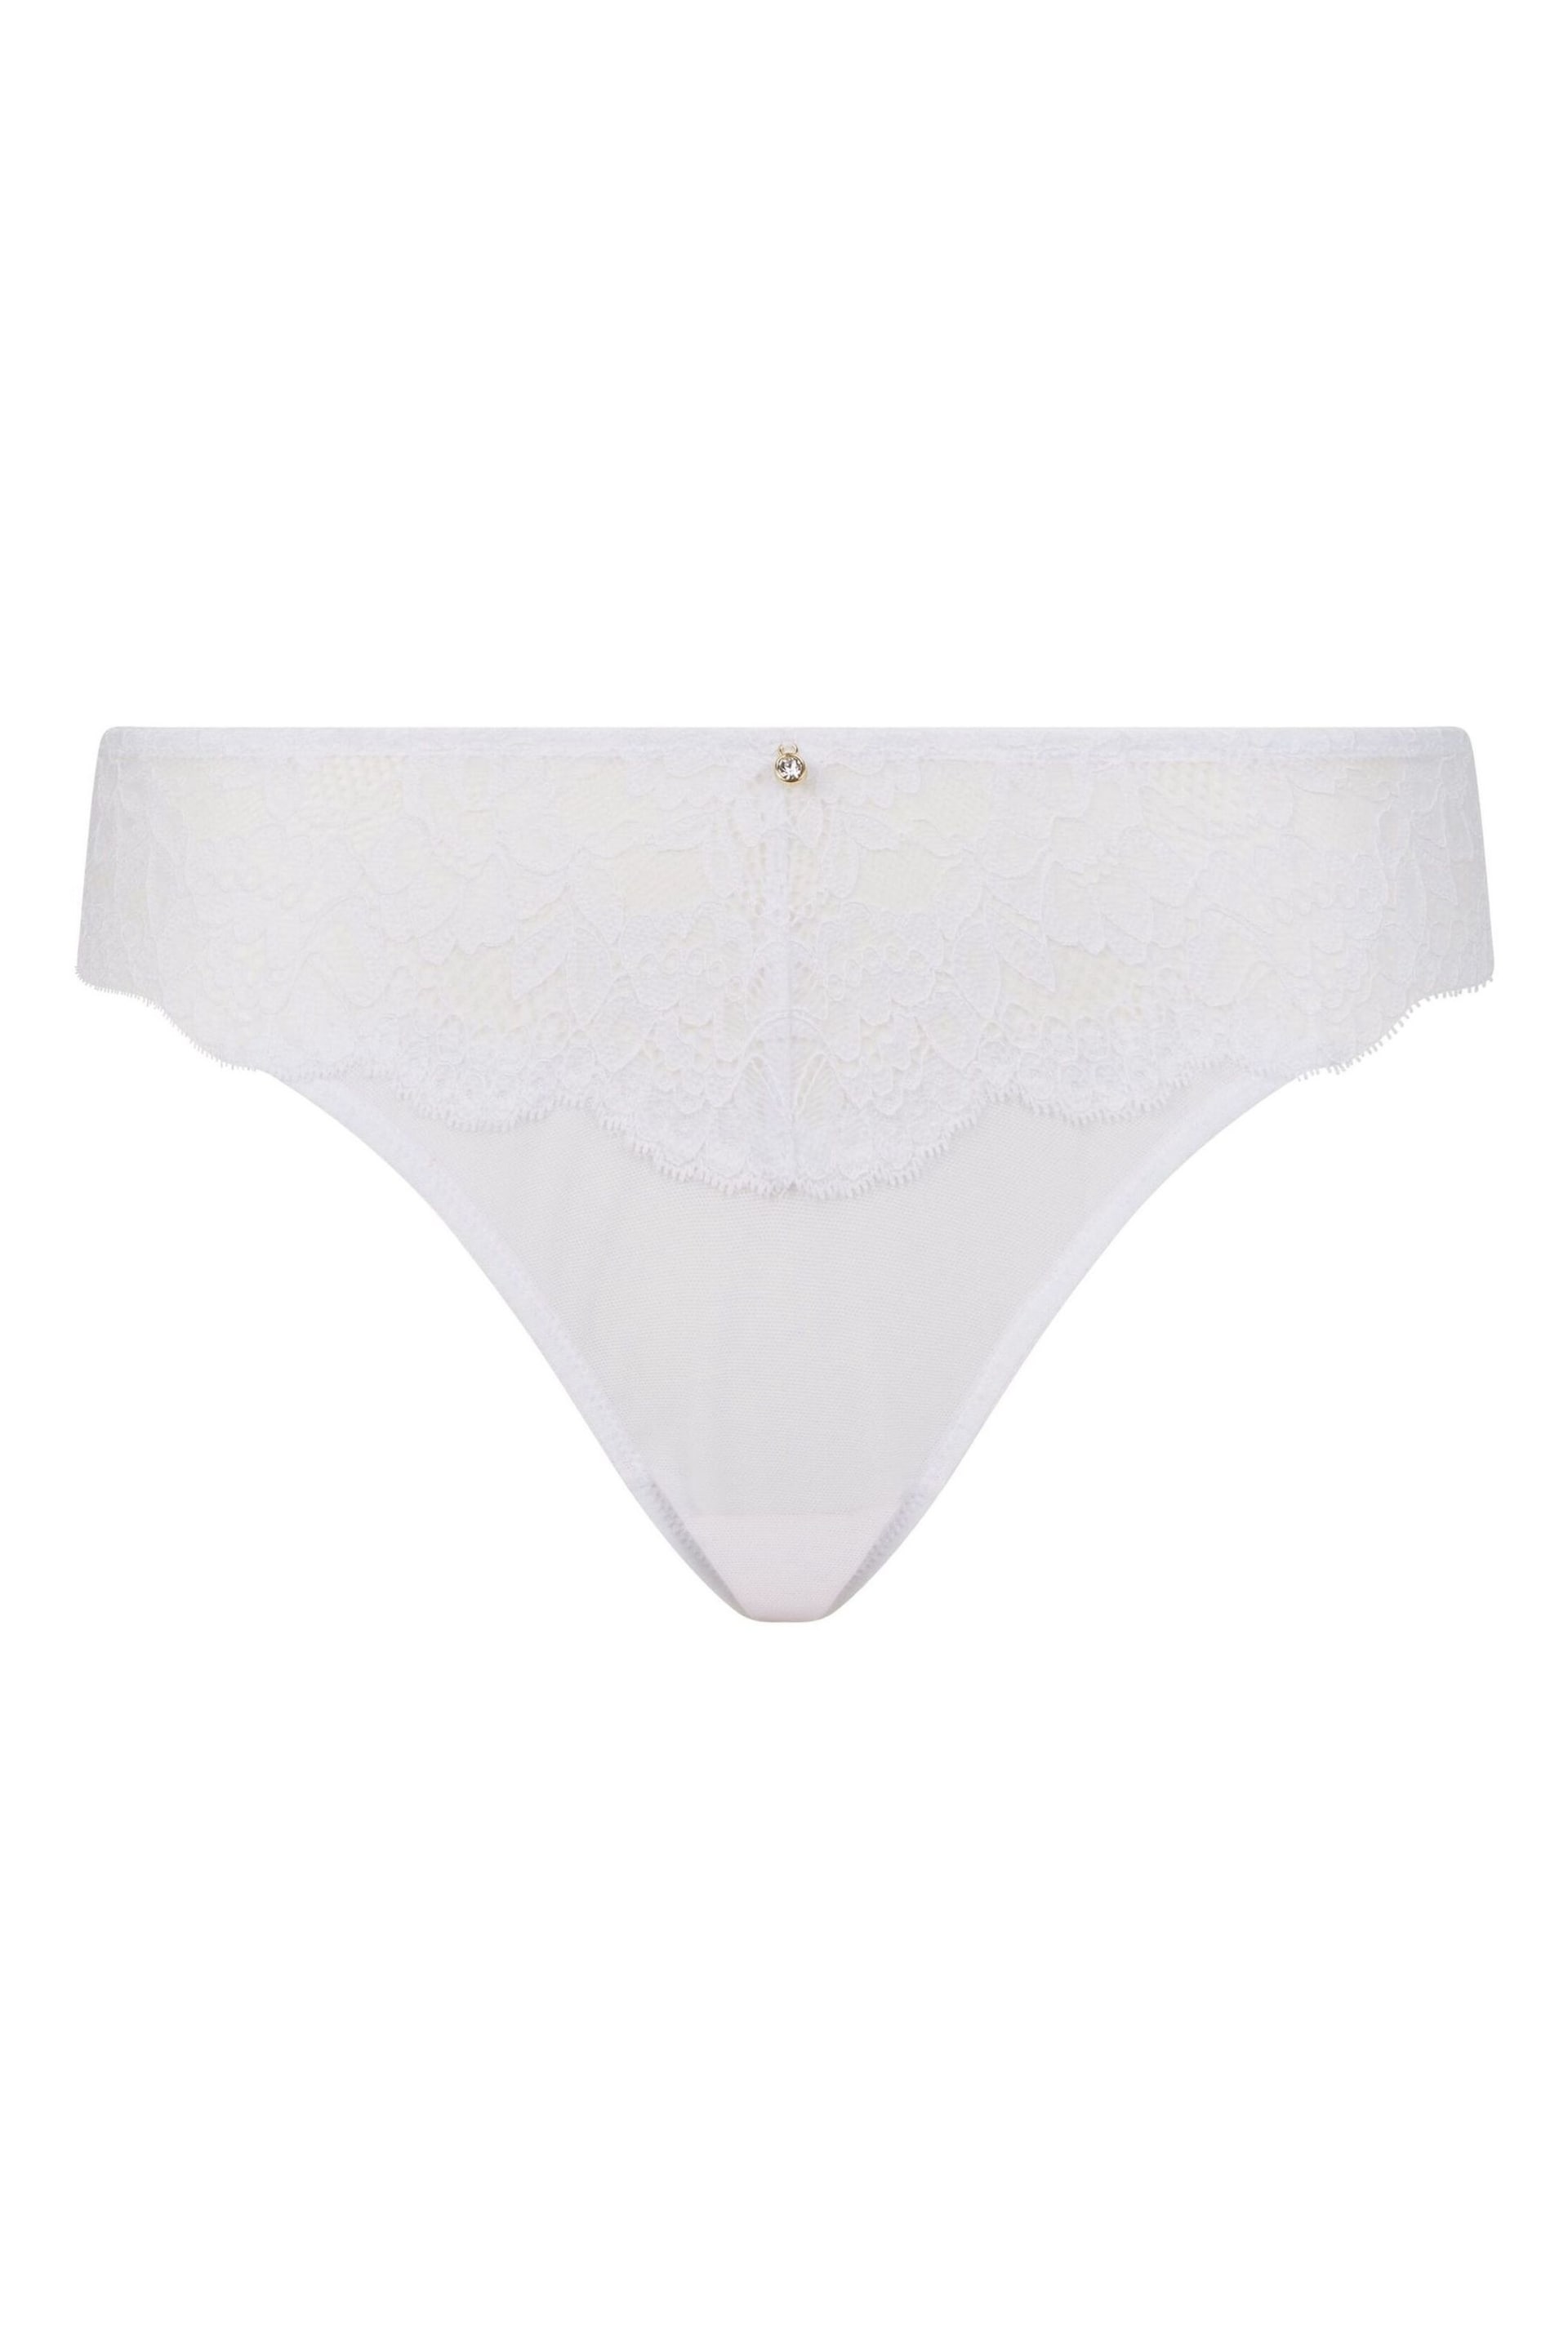 Ann Summers White Sexy Lace Planet Thong - Image 4 of 4